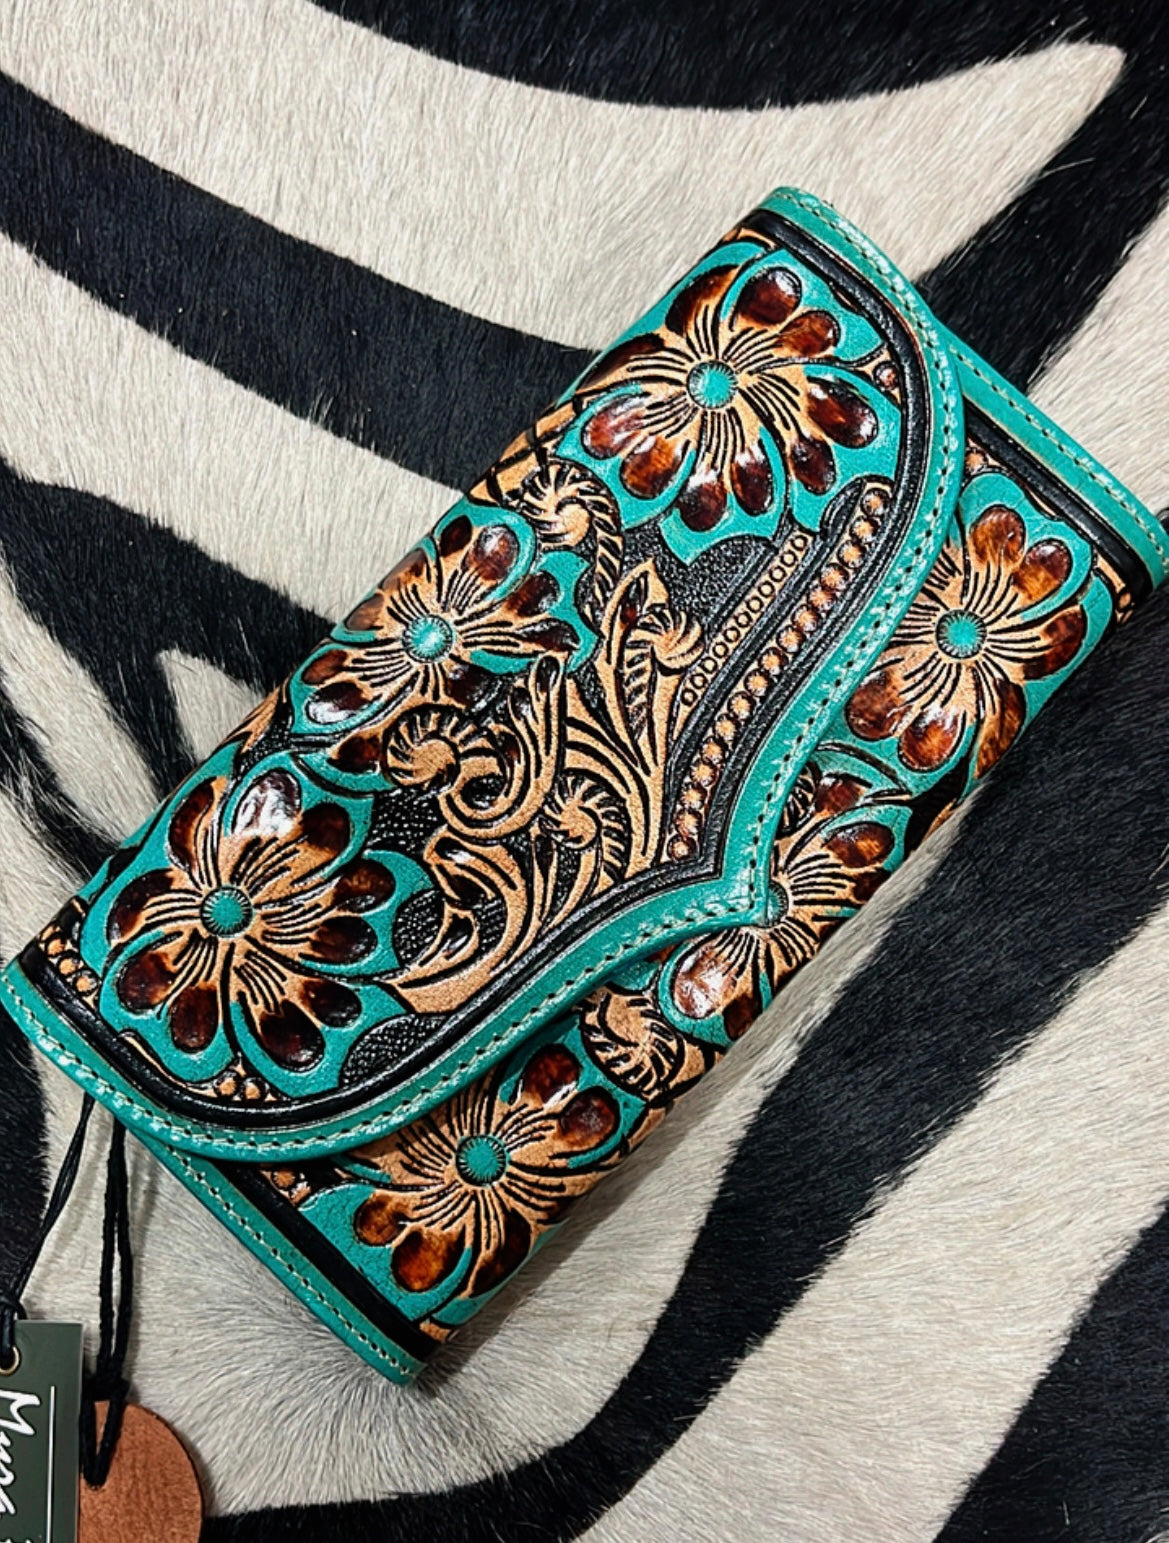 The Turquoise Floral Wallet